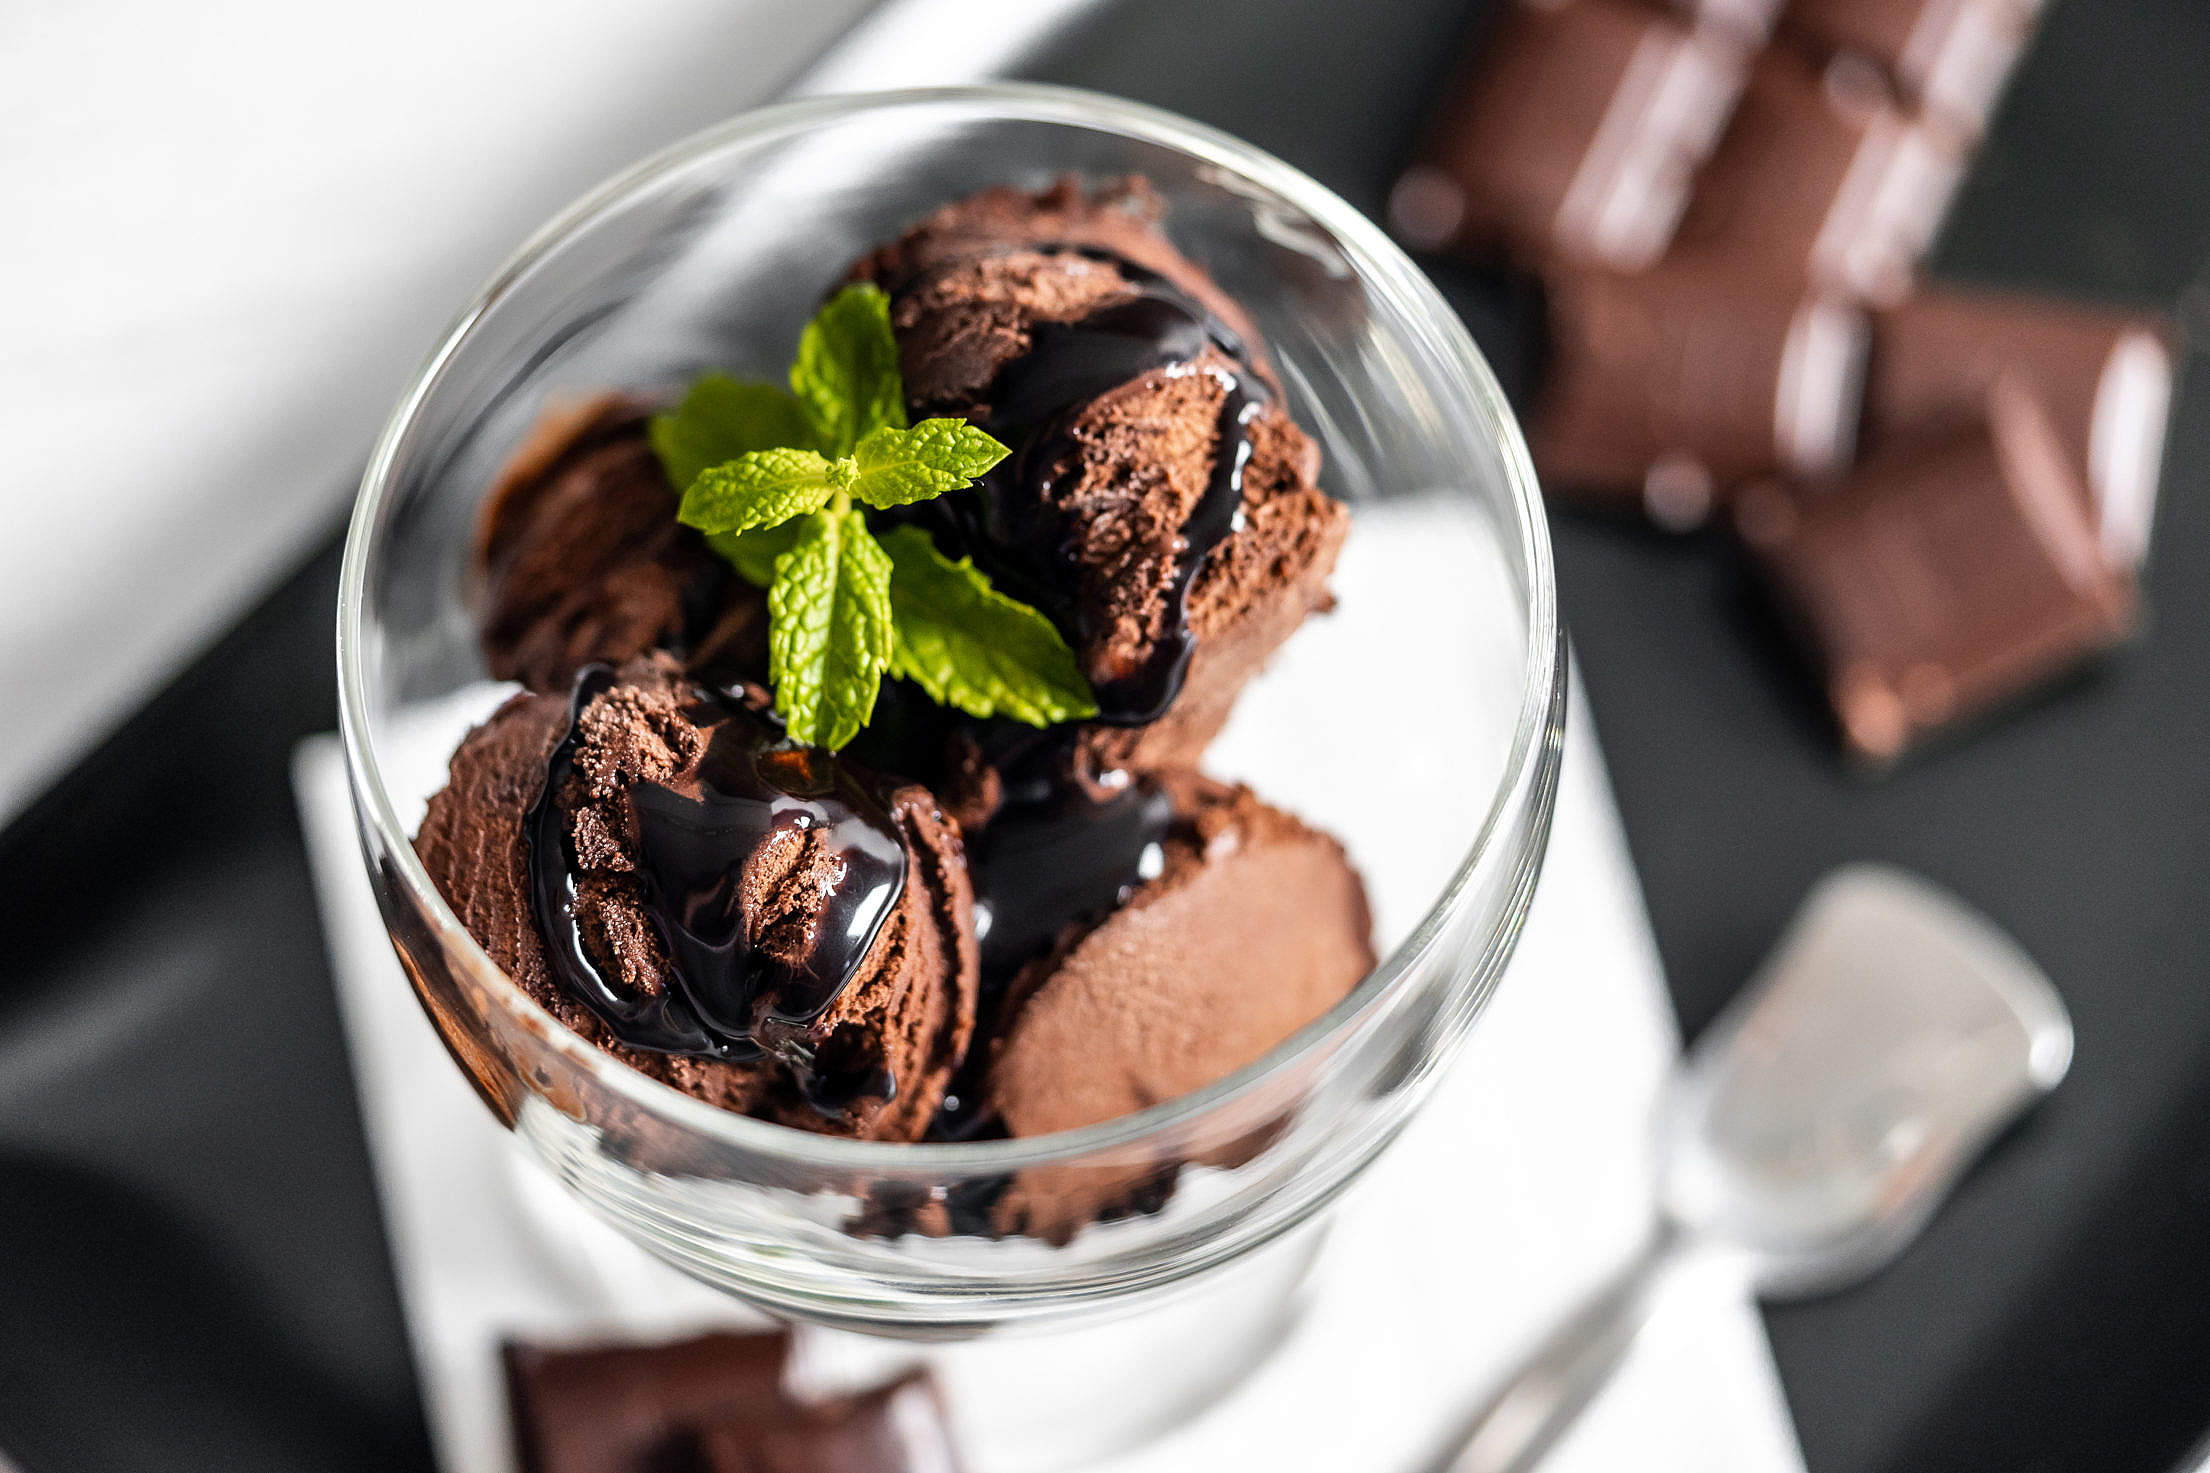 Chocolate Ice Cream Scoops in a Glass Free Stock Photo